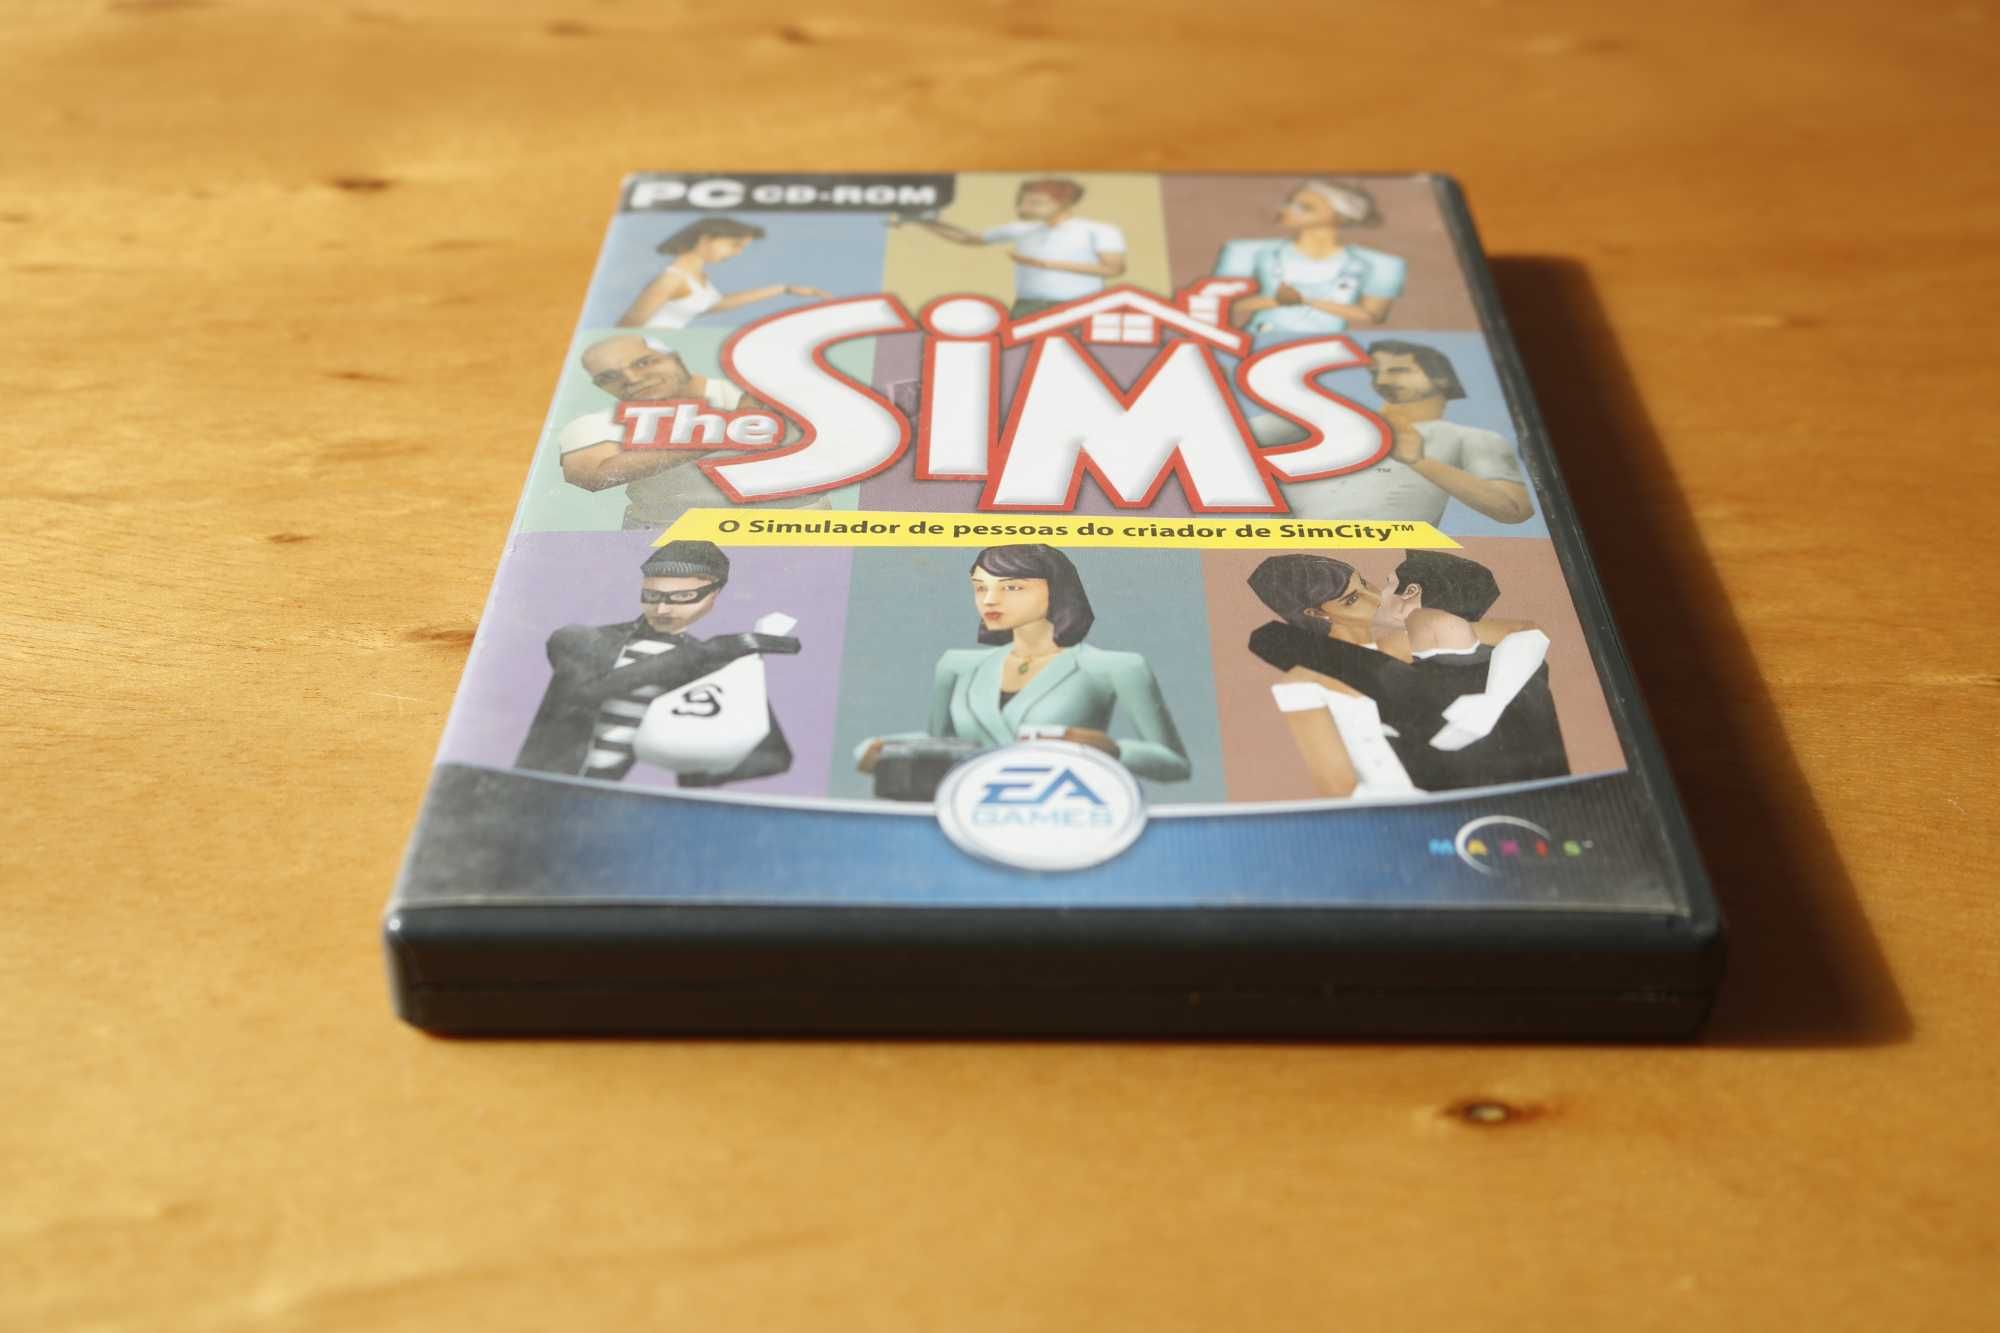 SIMS (e SIMS Unleashed) + SIMS 2